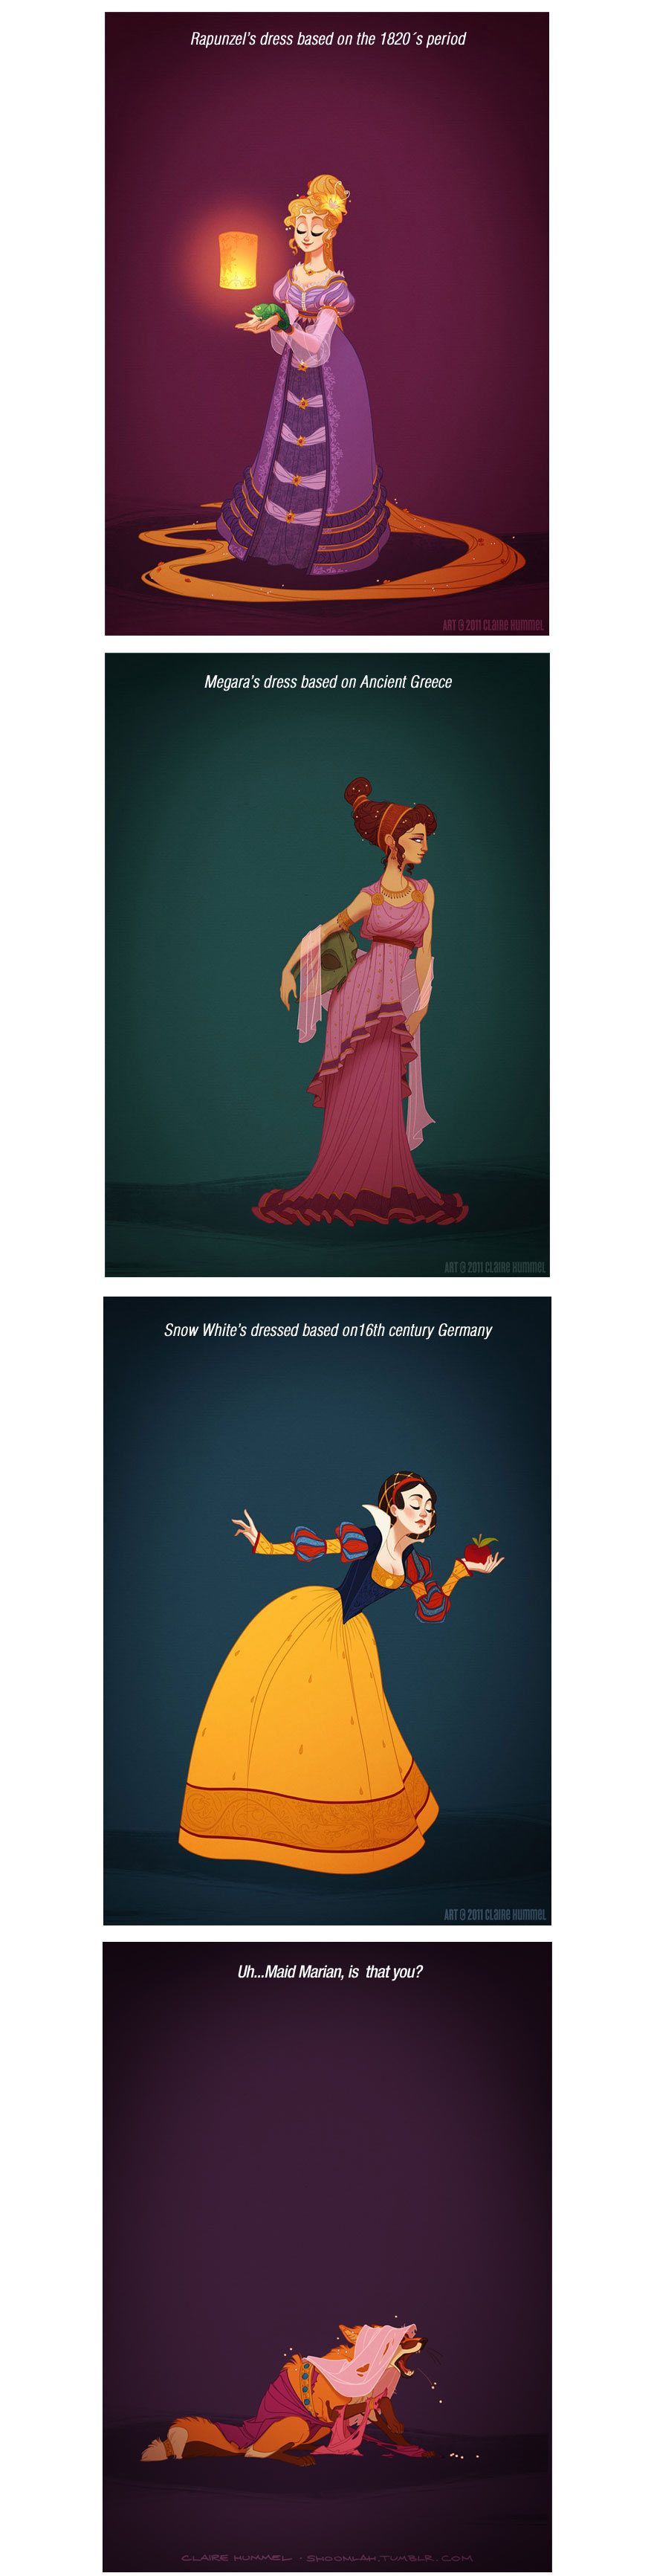 If Disney Princesses Wore Historically Accurate Outfits